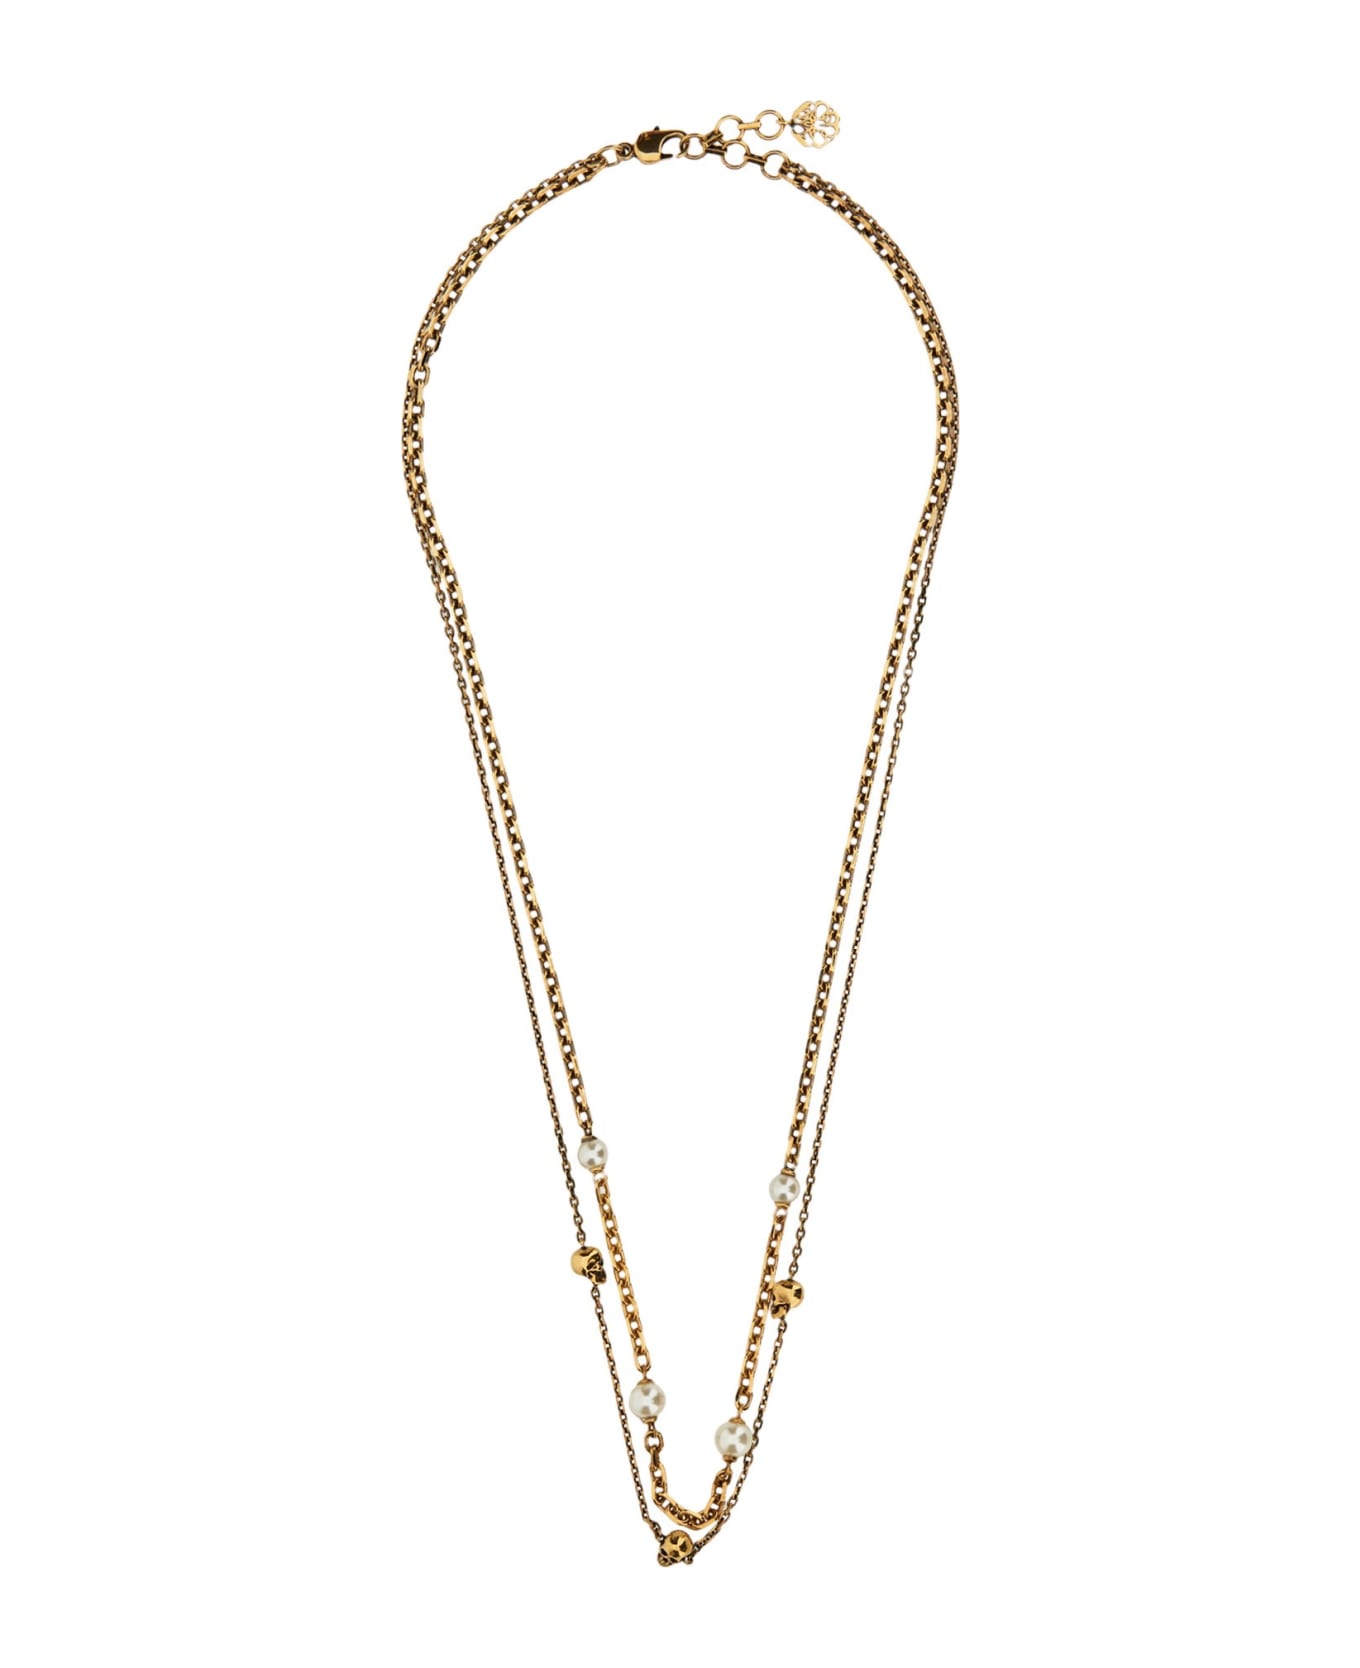 Alexander McQueen Skull Pearl Chain Necklace - ORO ネックレス